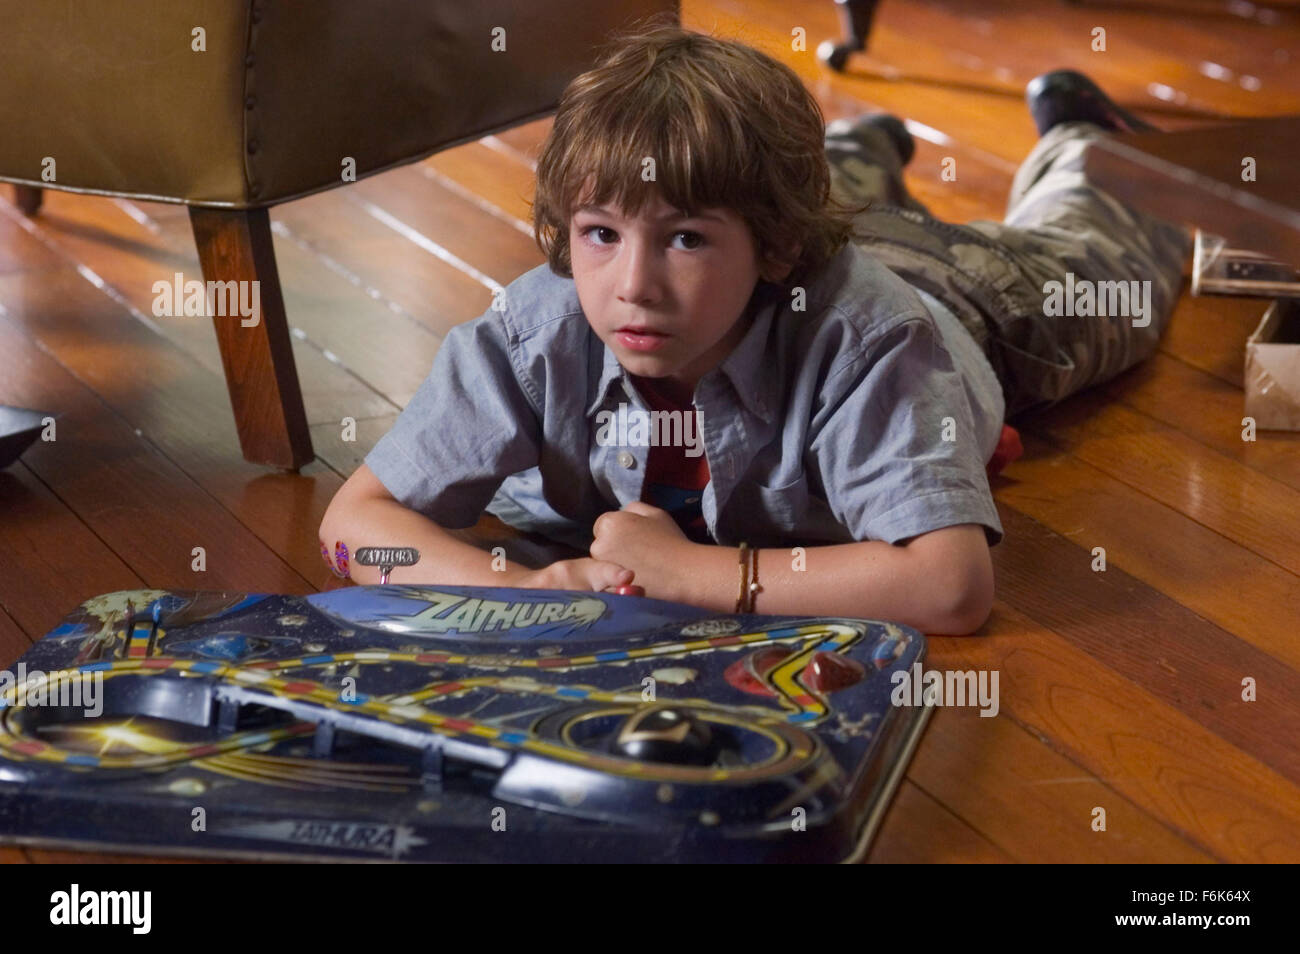 RELEASE DATE: November 11, 2005. MOVIE TITLE: Zathura: A Space Adventure. STUDIO: Columbia Pictures. PLOT: Two young brothers are drawn into an intergalactic adventure when their house is magically hurtled through space because of the board game they are playing. PICTURED: JONAH BOBO stars as Danny Budwing. Stock Photo